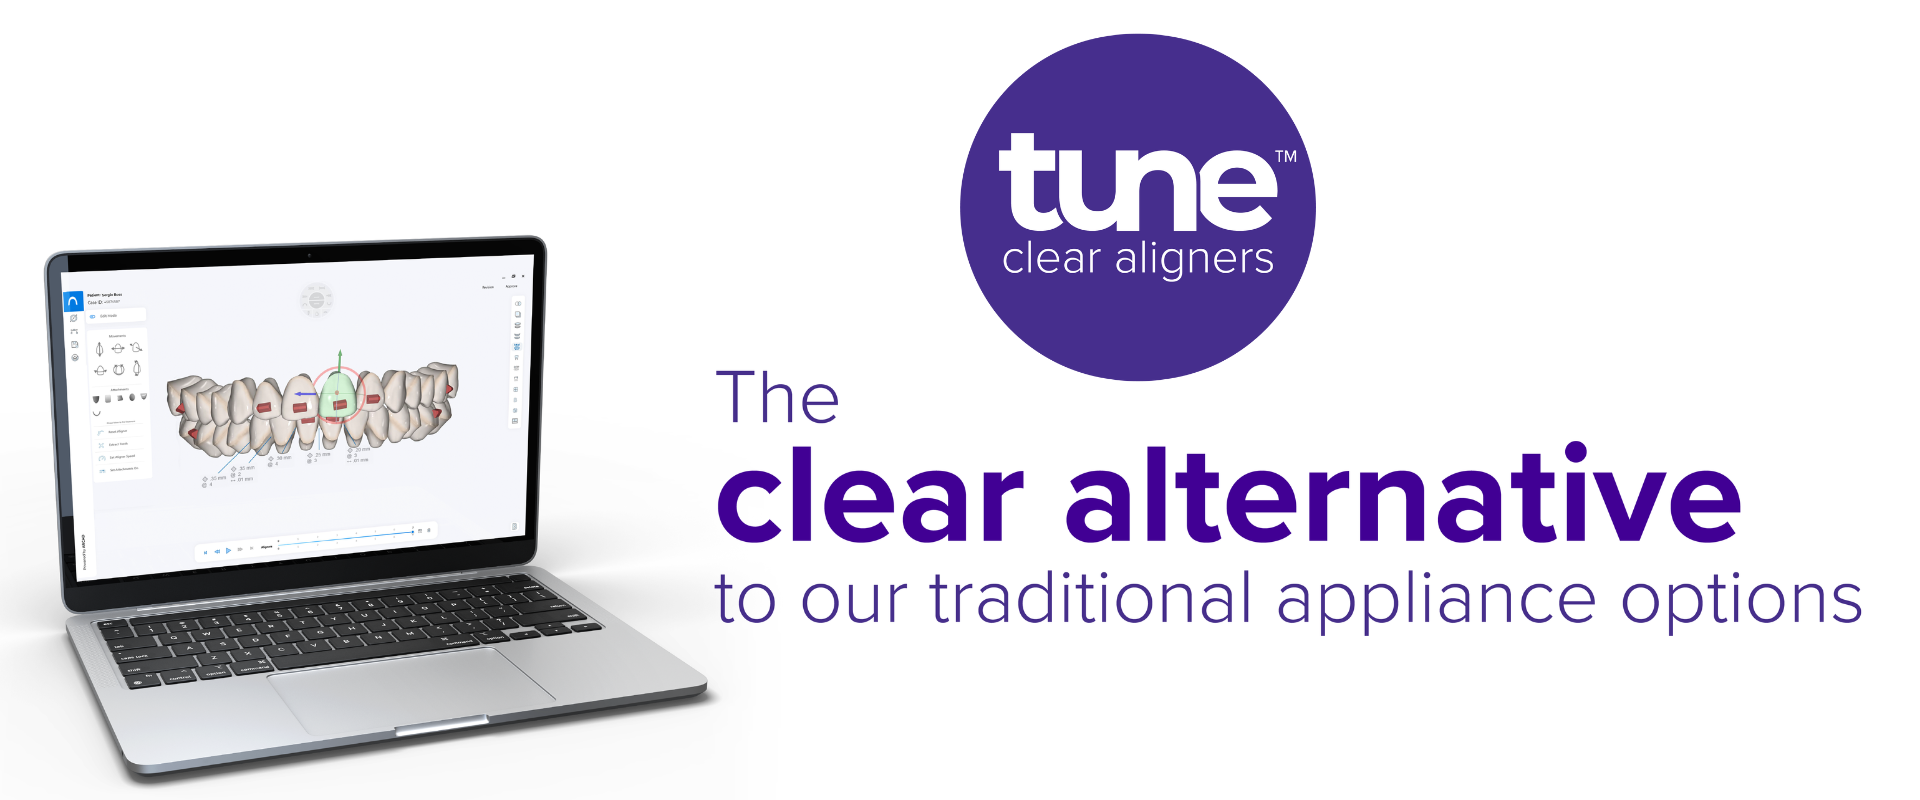 Tune clear aligners